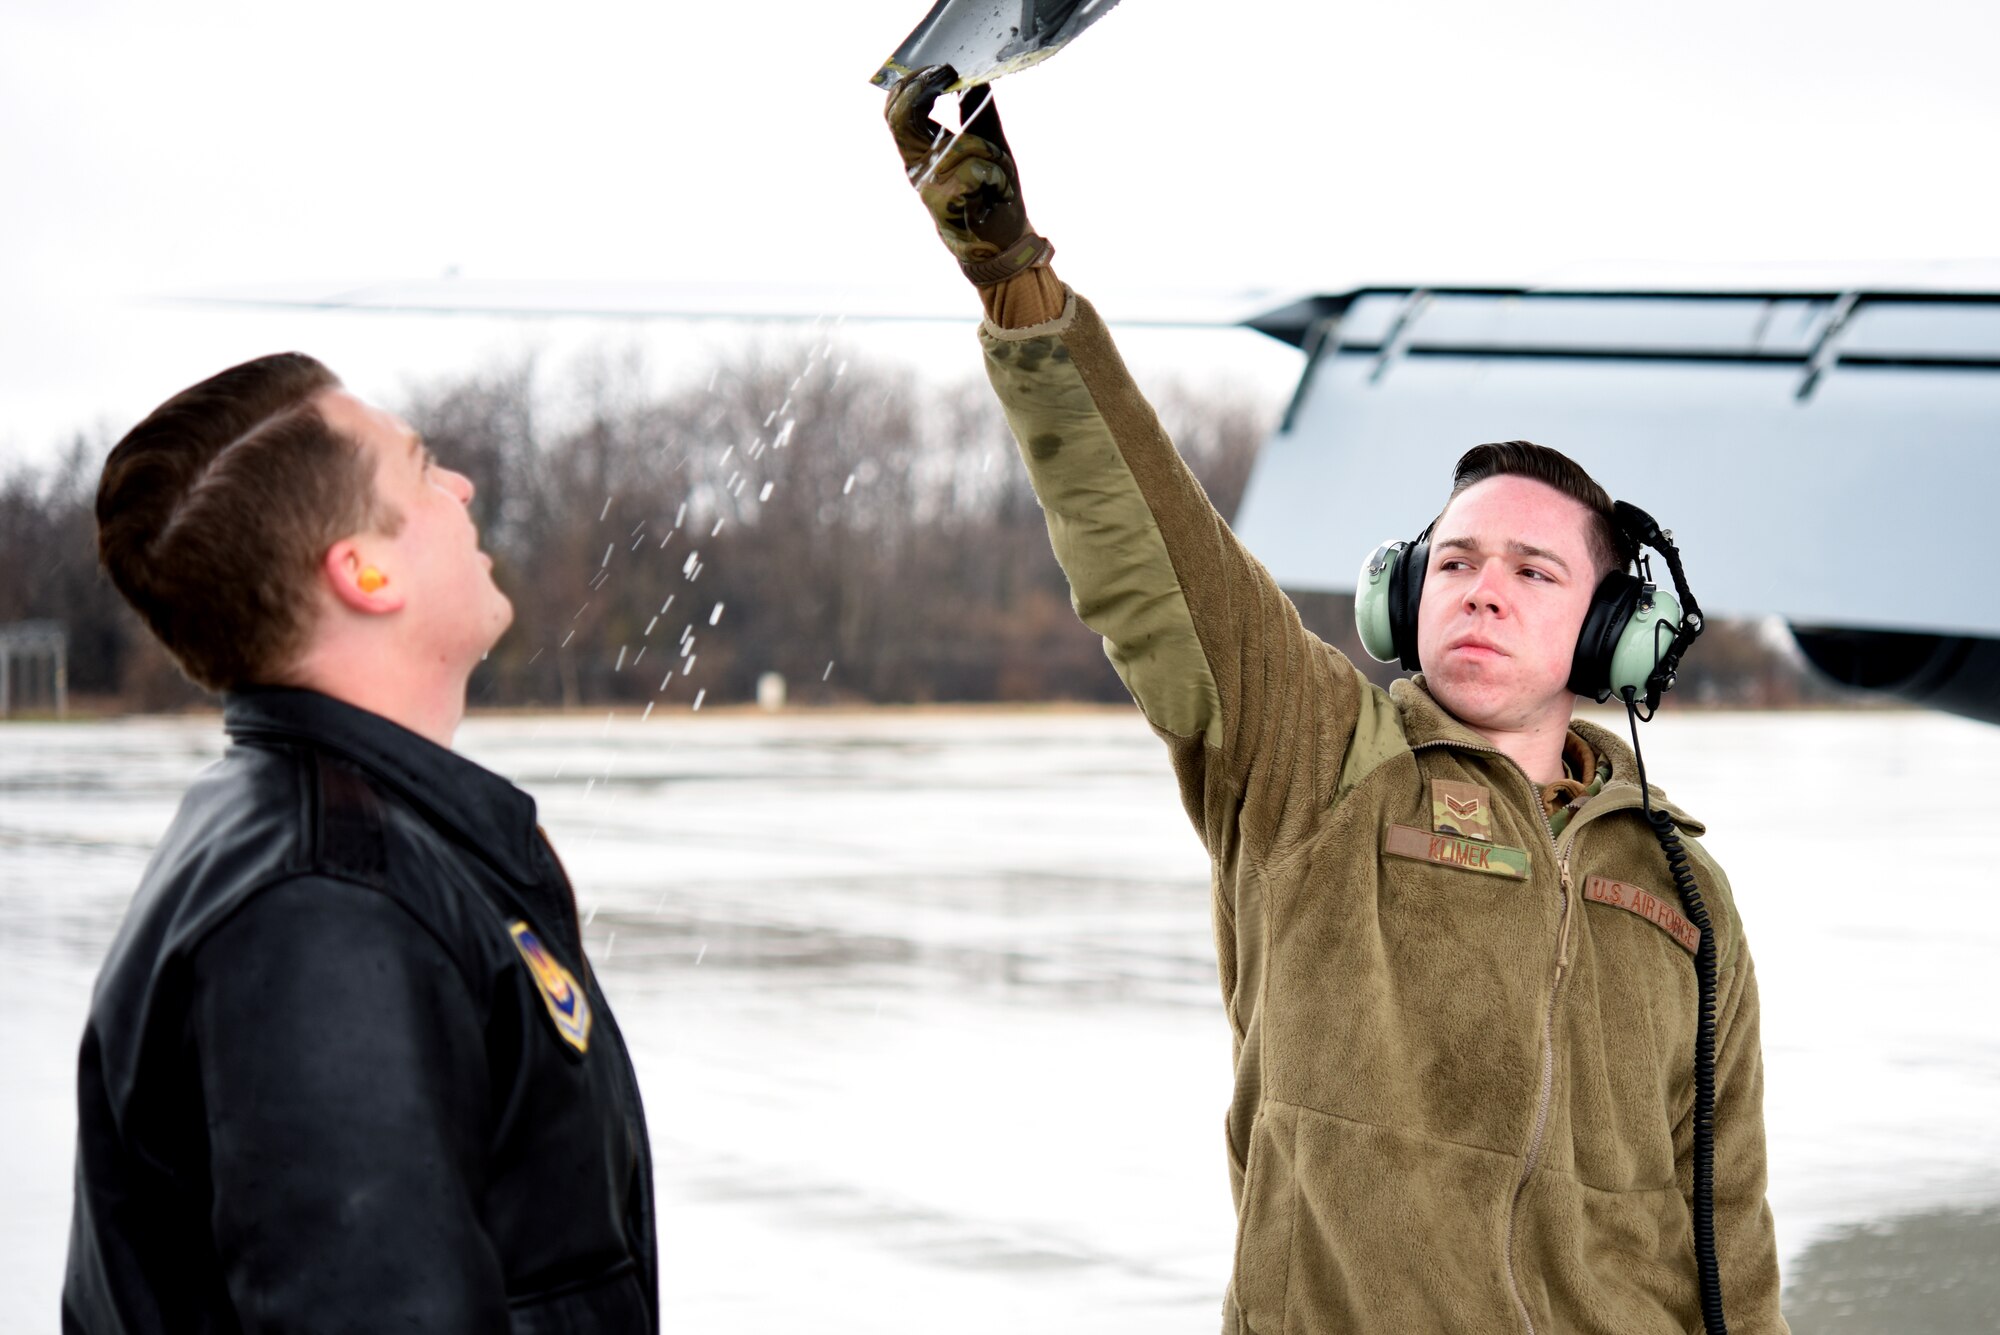 U.S. Air Force Capt. Logan Dean, 351st Air Refueling Squadron pilot, and U.S. Air Force Senior Airman Christian Klimek, 100th Aircraft Maintenance Squadron flying crew chief, conduct a walk-around prior to take-off for refueling training with Romanian air force F-16s in Bucharest, Romania, March 12, 2019. The training was an example of U.S. and NATO allies sharing a commitment to promote peace and stability through developing their relationship and communication process. (U.S. Air Force photo by Airman 1st Class Brandon Esau)